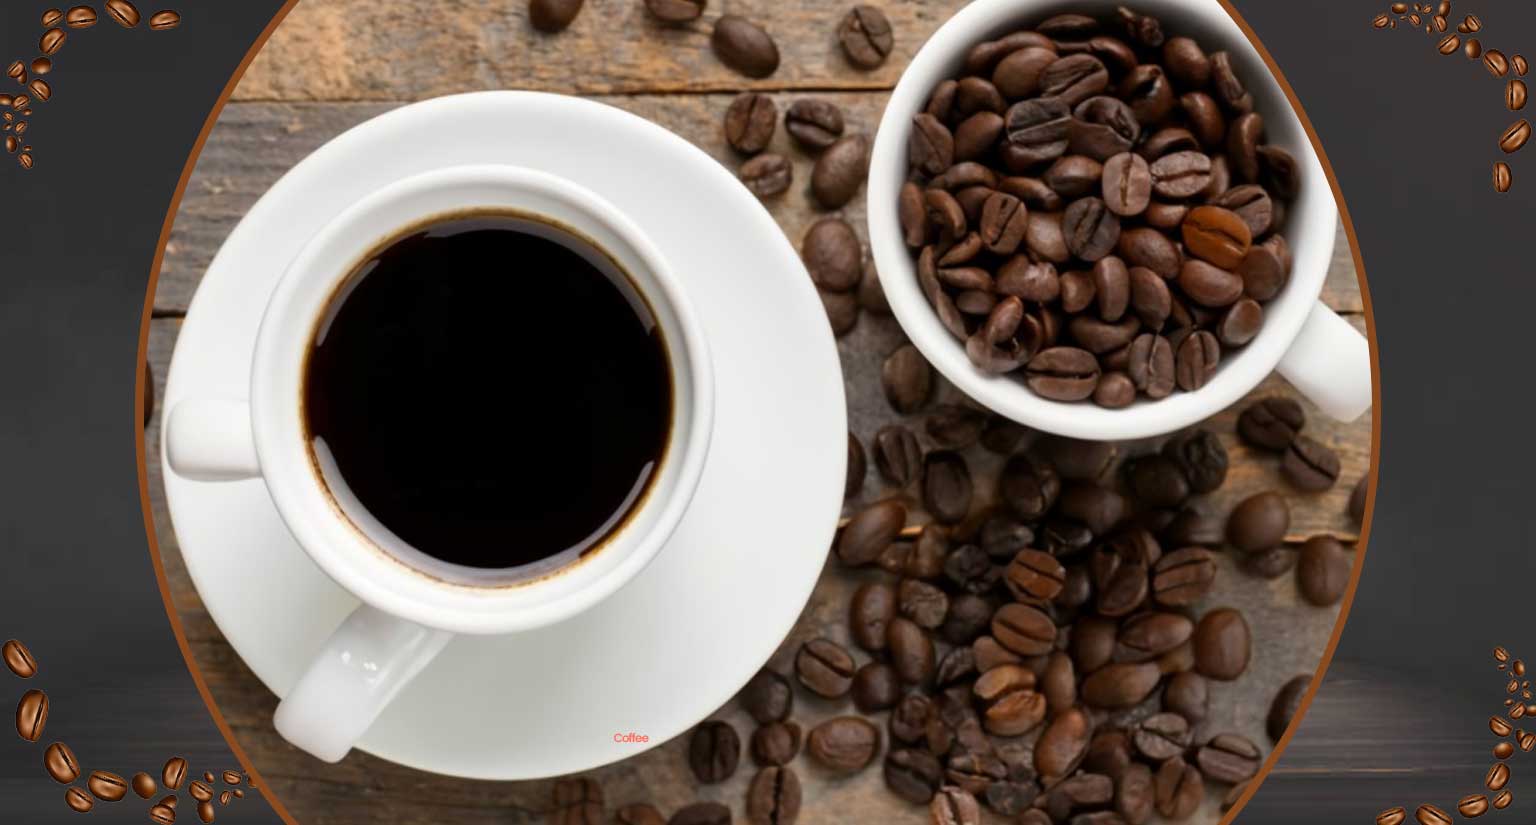 What Coffee Has More Caffeine?